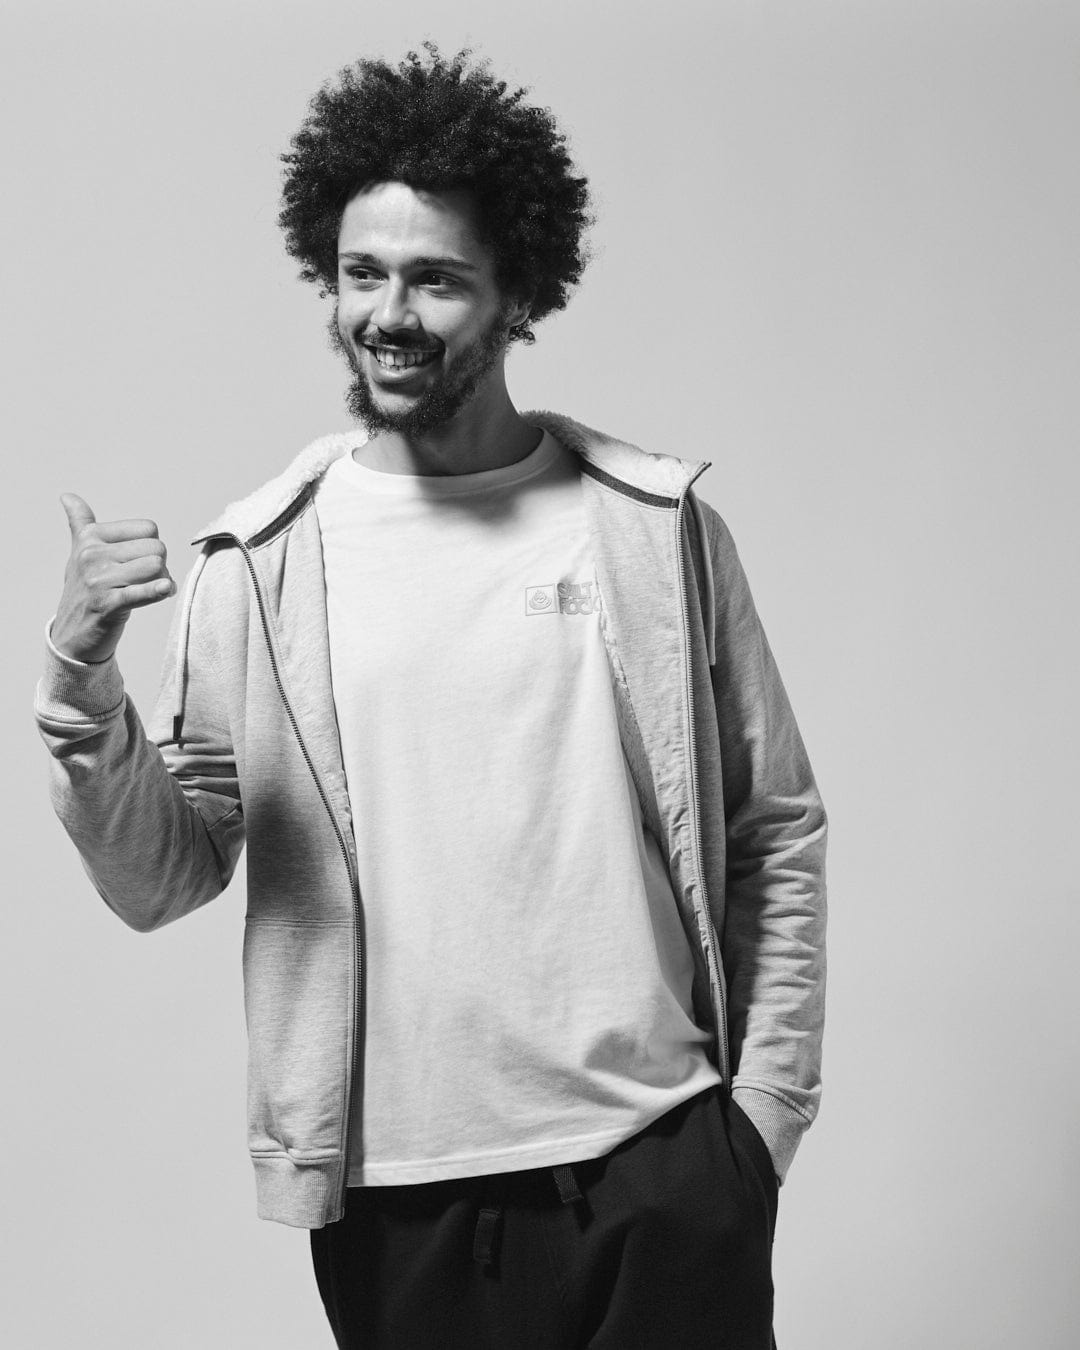 A man with an afro smiles while giving a thumbs-up gesture, dressed in a casual jacket and Saltrock Original - Mens Short Sleeve T-Shirt - Grey made of lightweight Cotton/Viscose material, against a plain background.